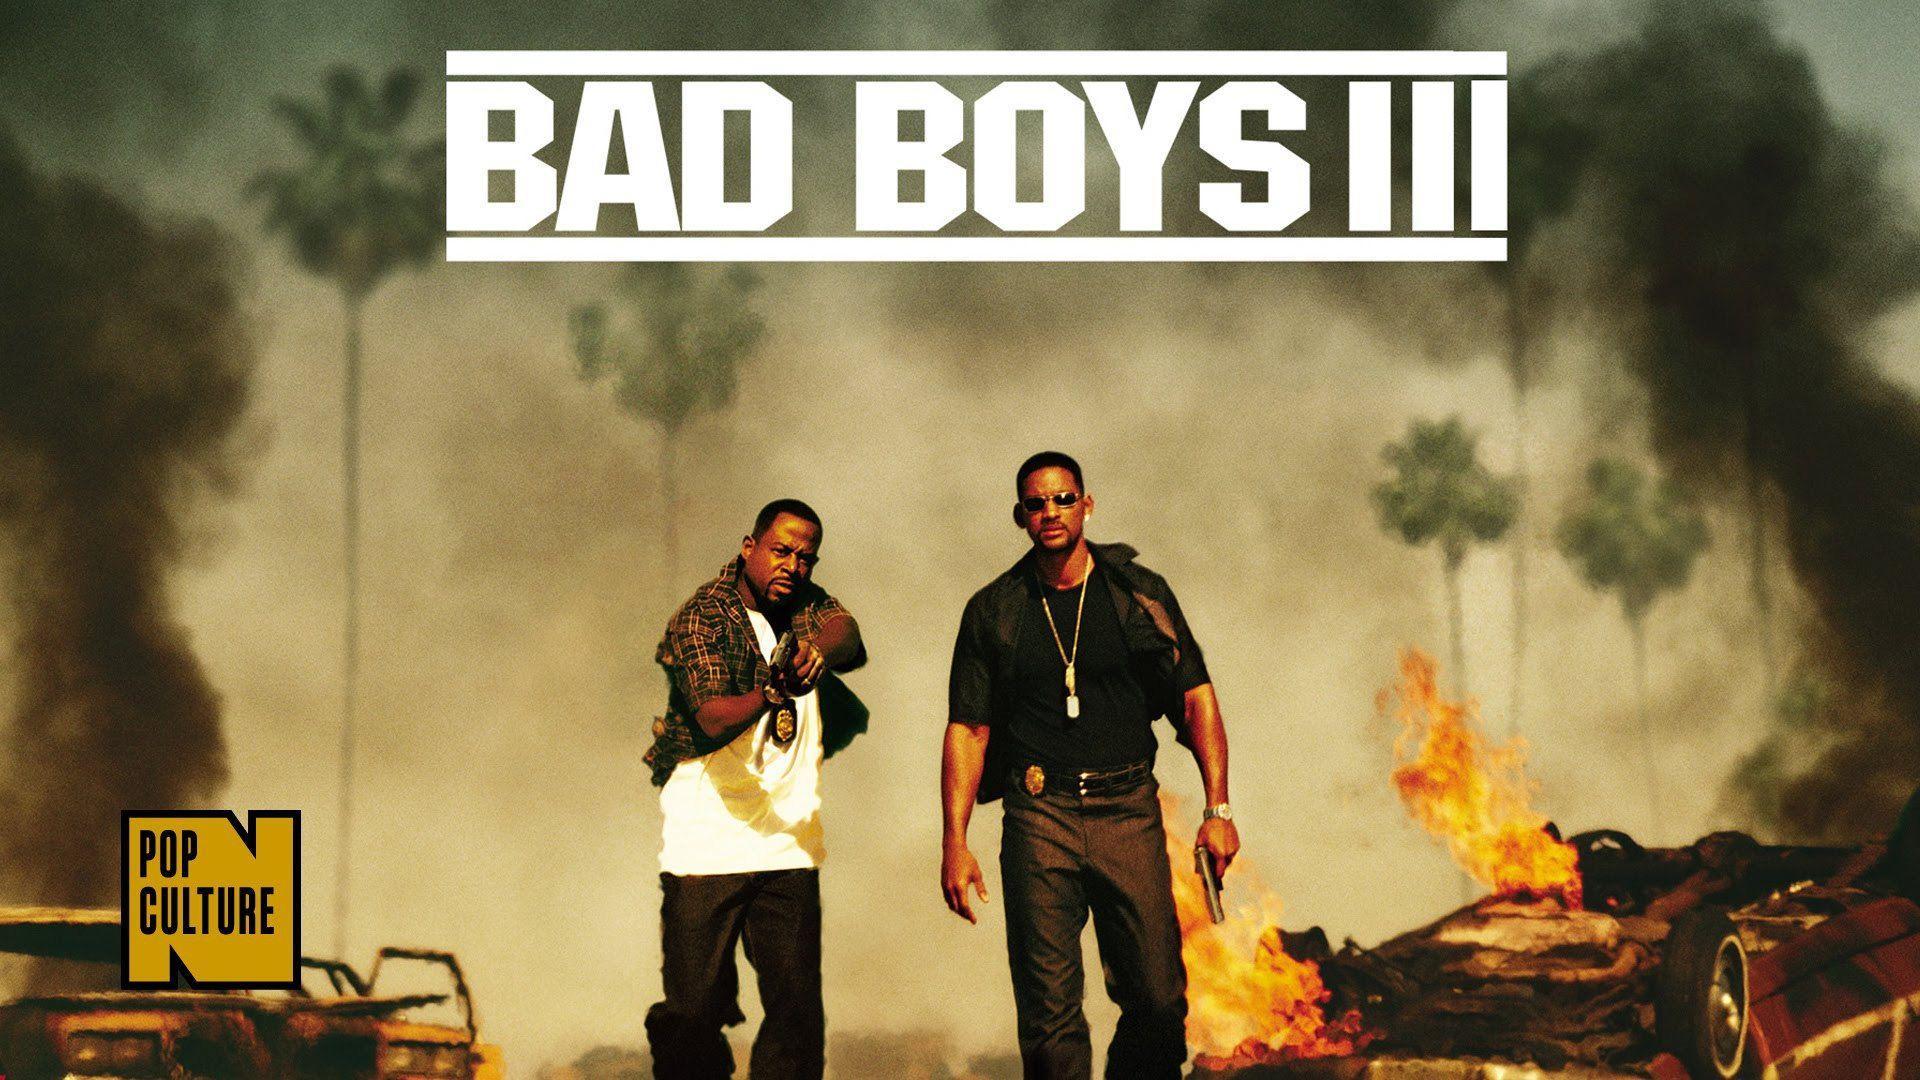 Bad Boys 3 Movies Image Photos Pictures Backgrounds